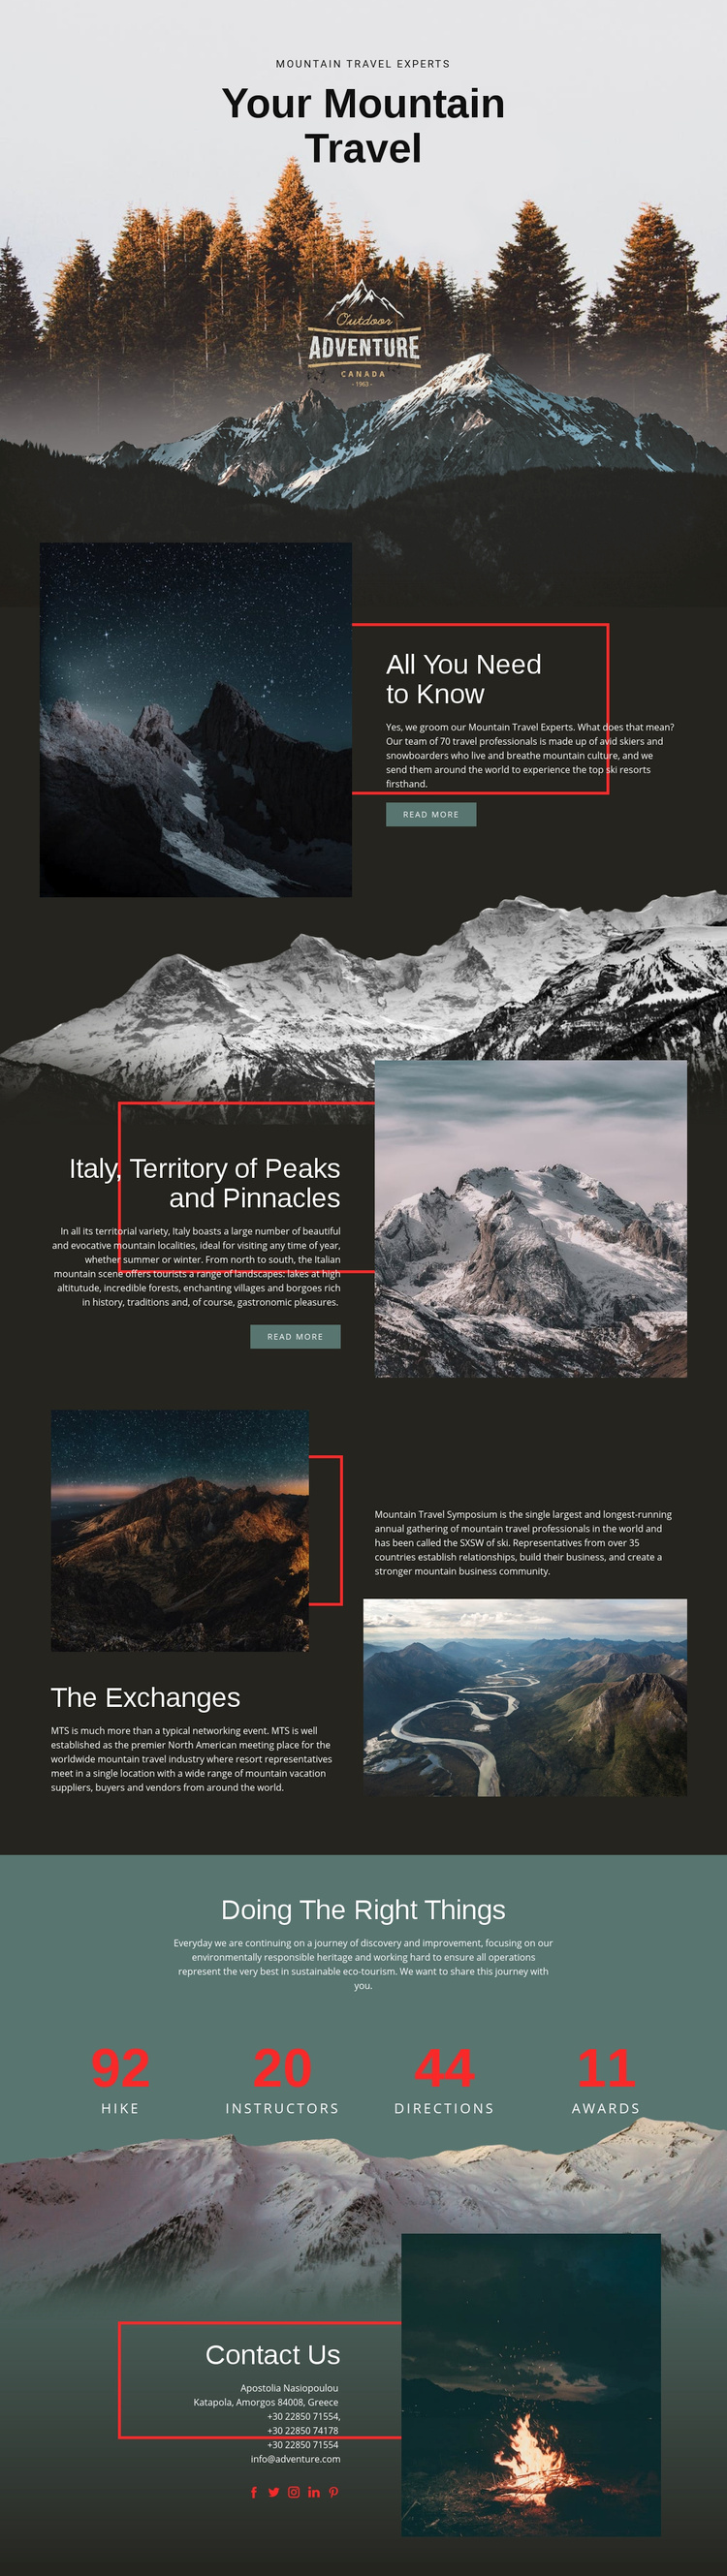 All about mountain travel Wix Template Alternative